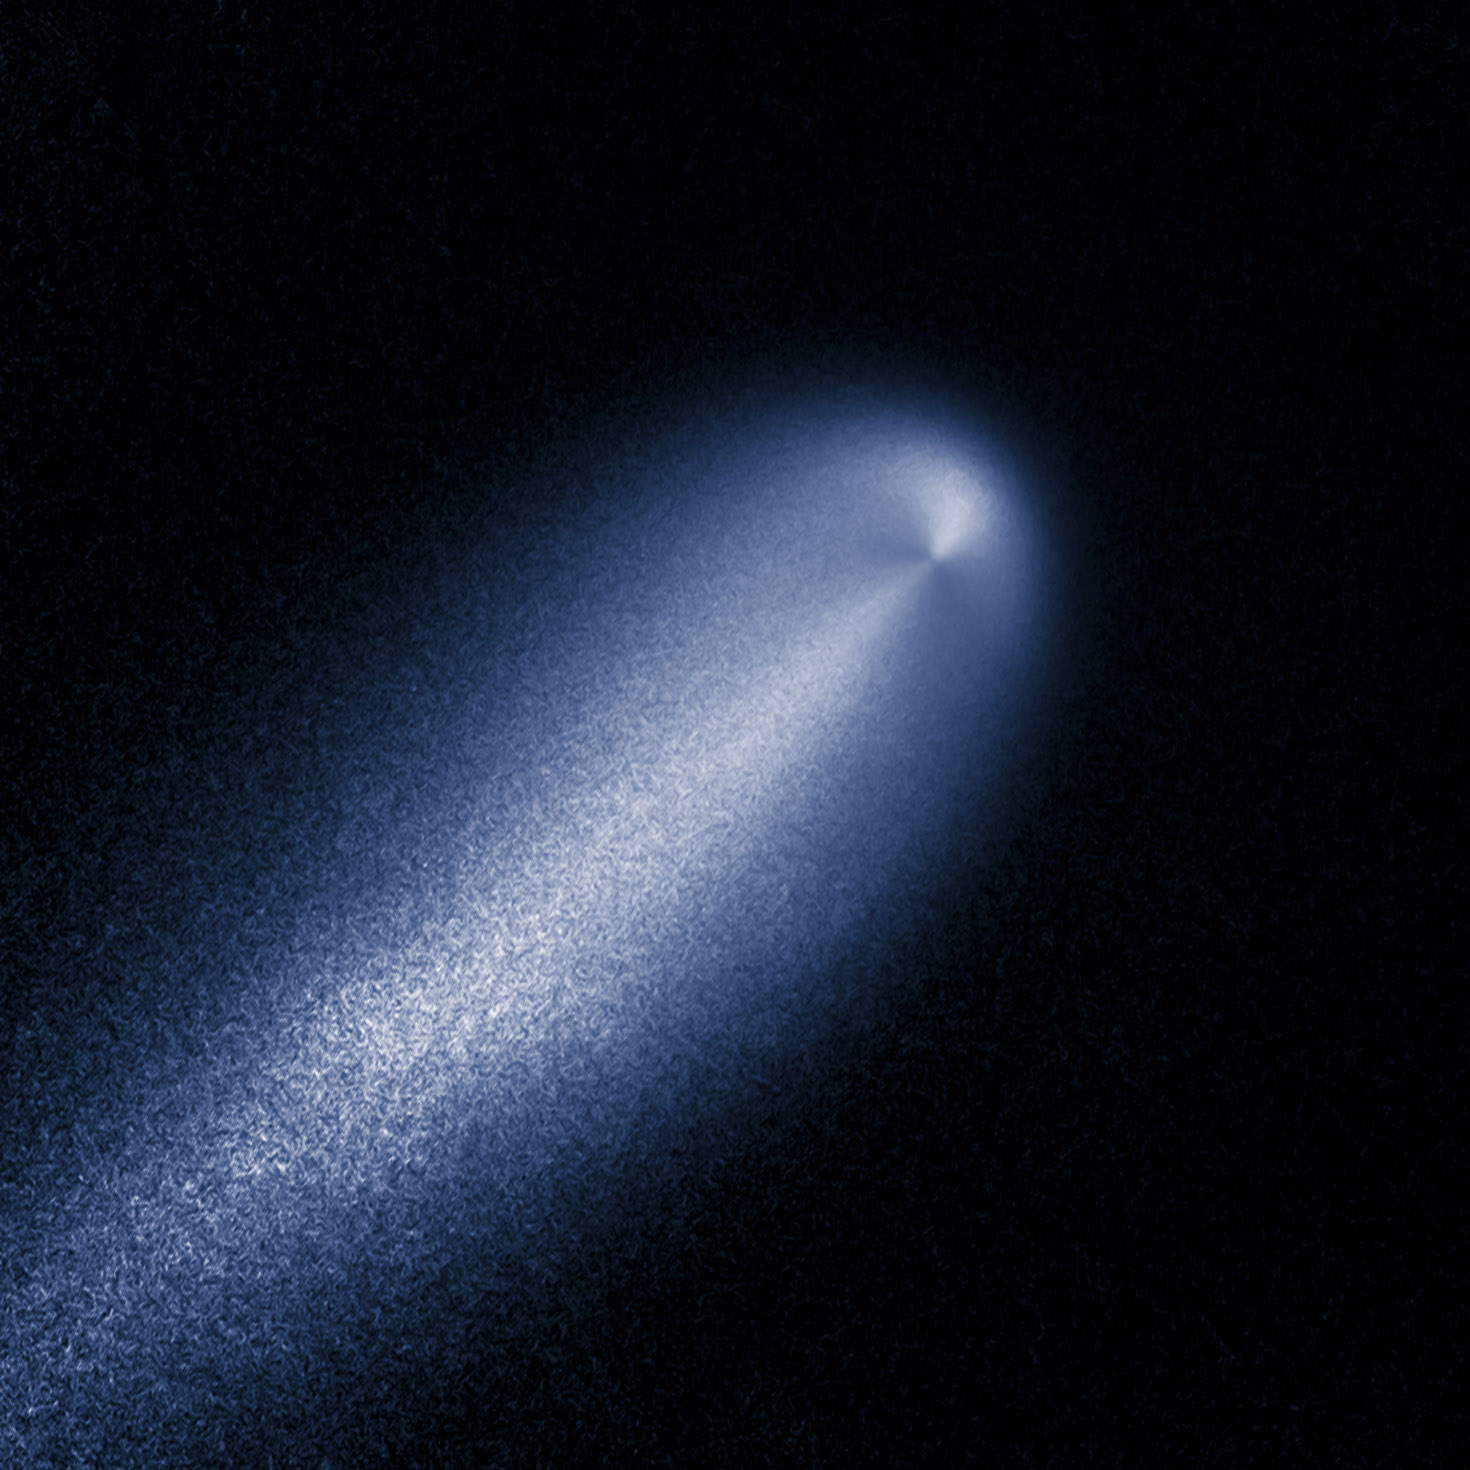 Image of Comet ISON